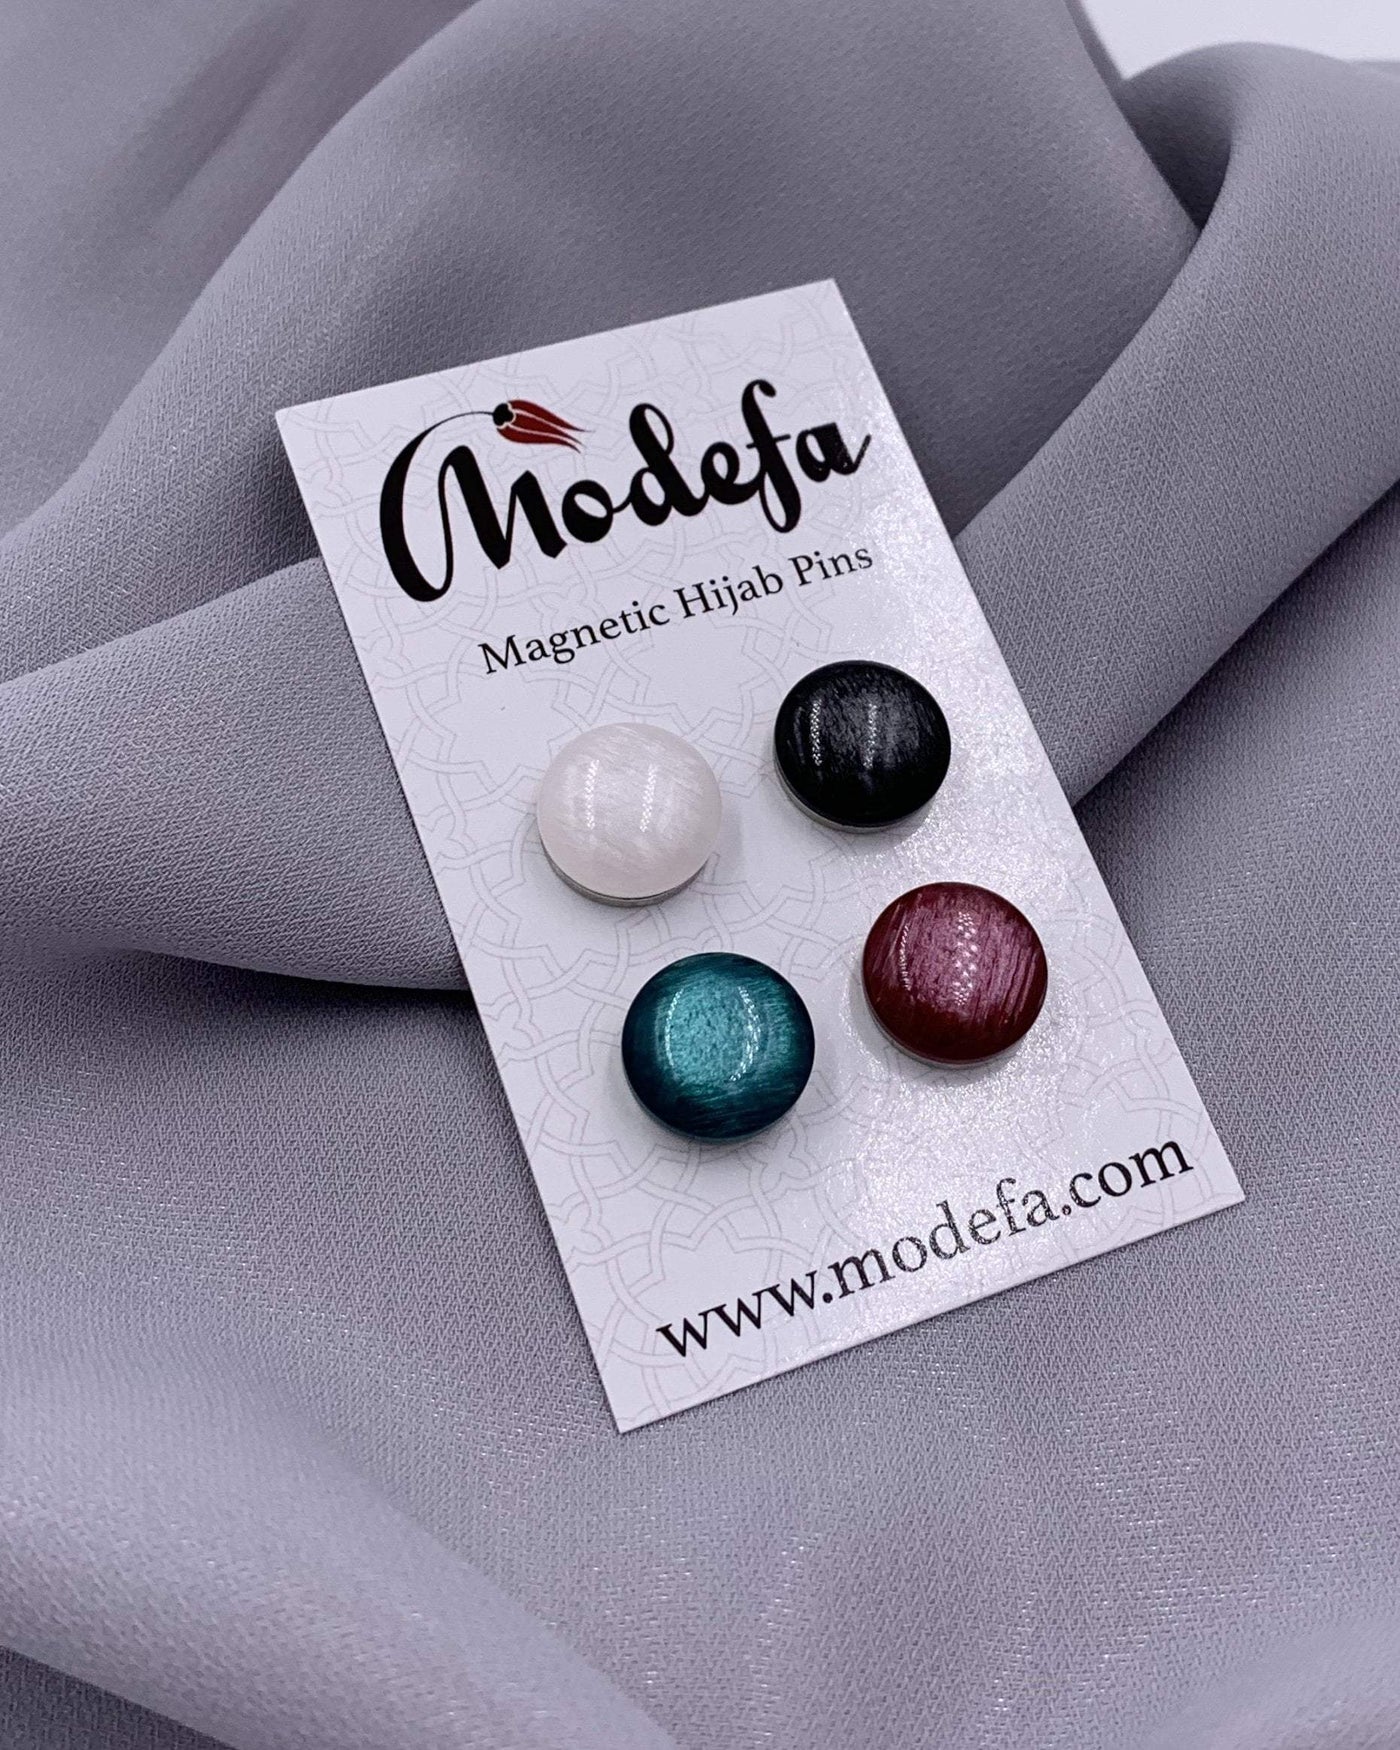 Modefa Magnetic pins Teal Brushed Gloss Magnetic Hijab 'Pin' - Teal